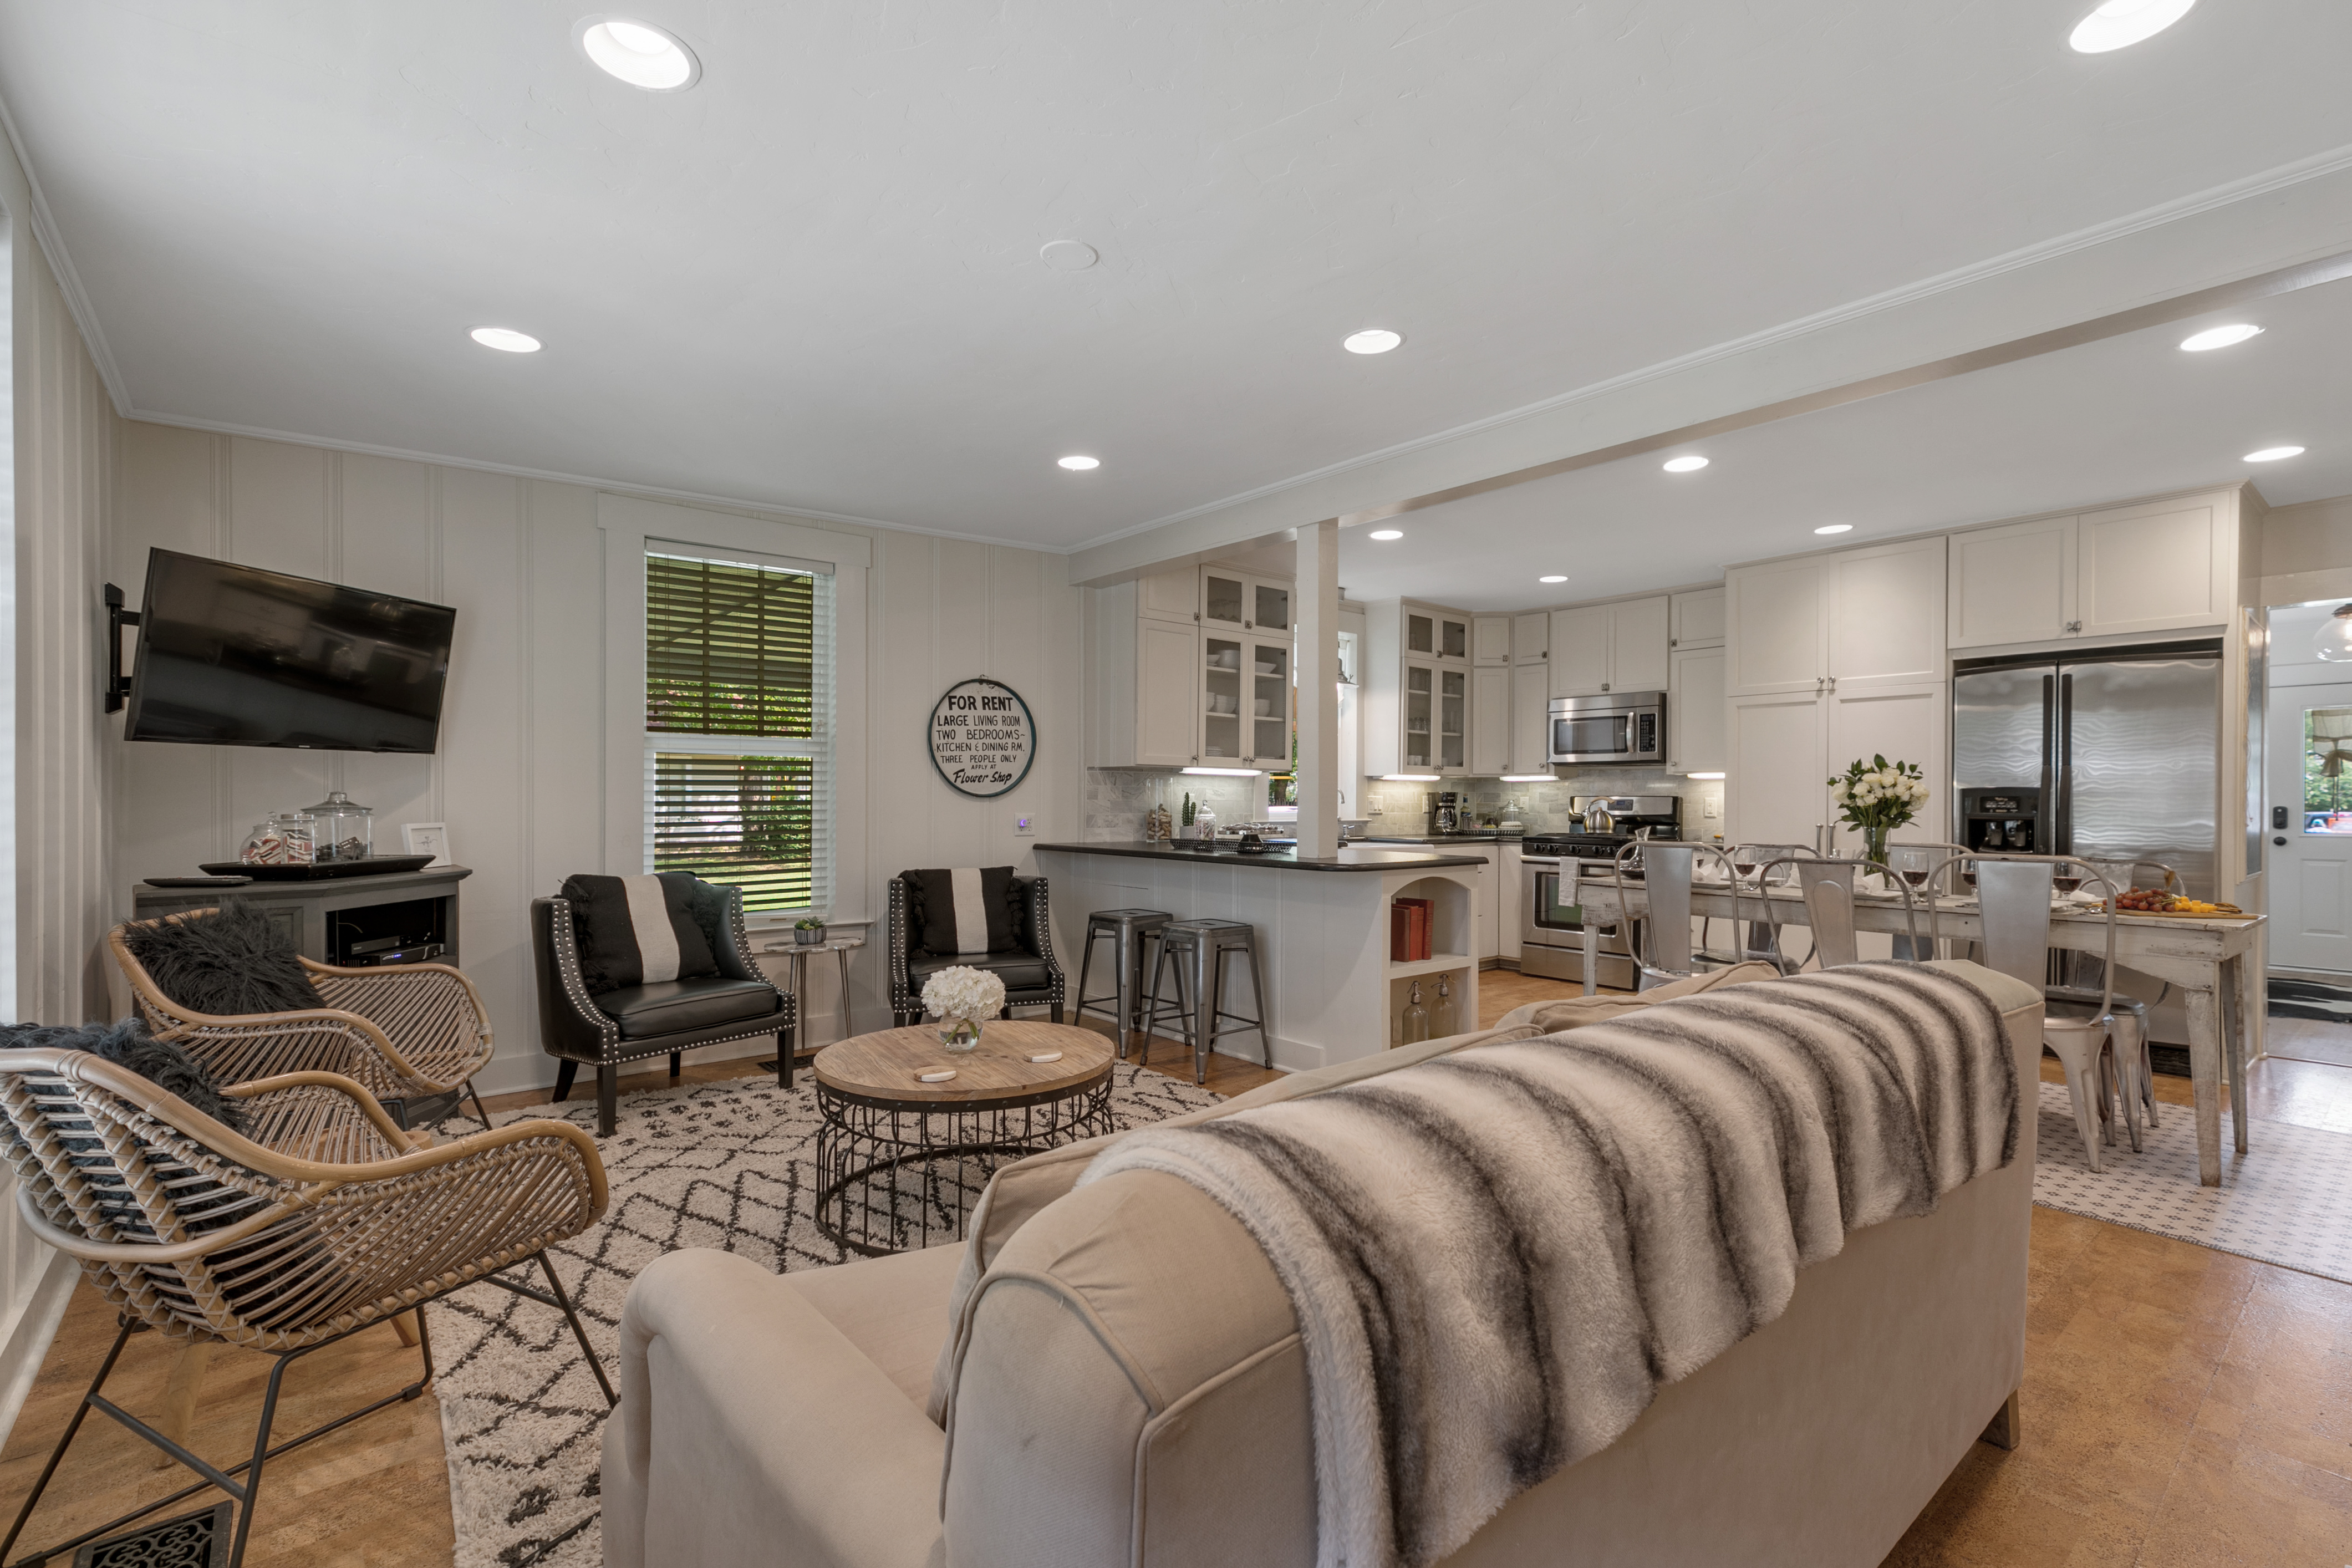 Clover Haus has an inviting open concept design, seamlessly connecting the living room, kitchen, and dining area for a spacious and communal feel.